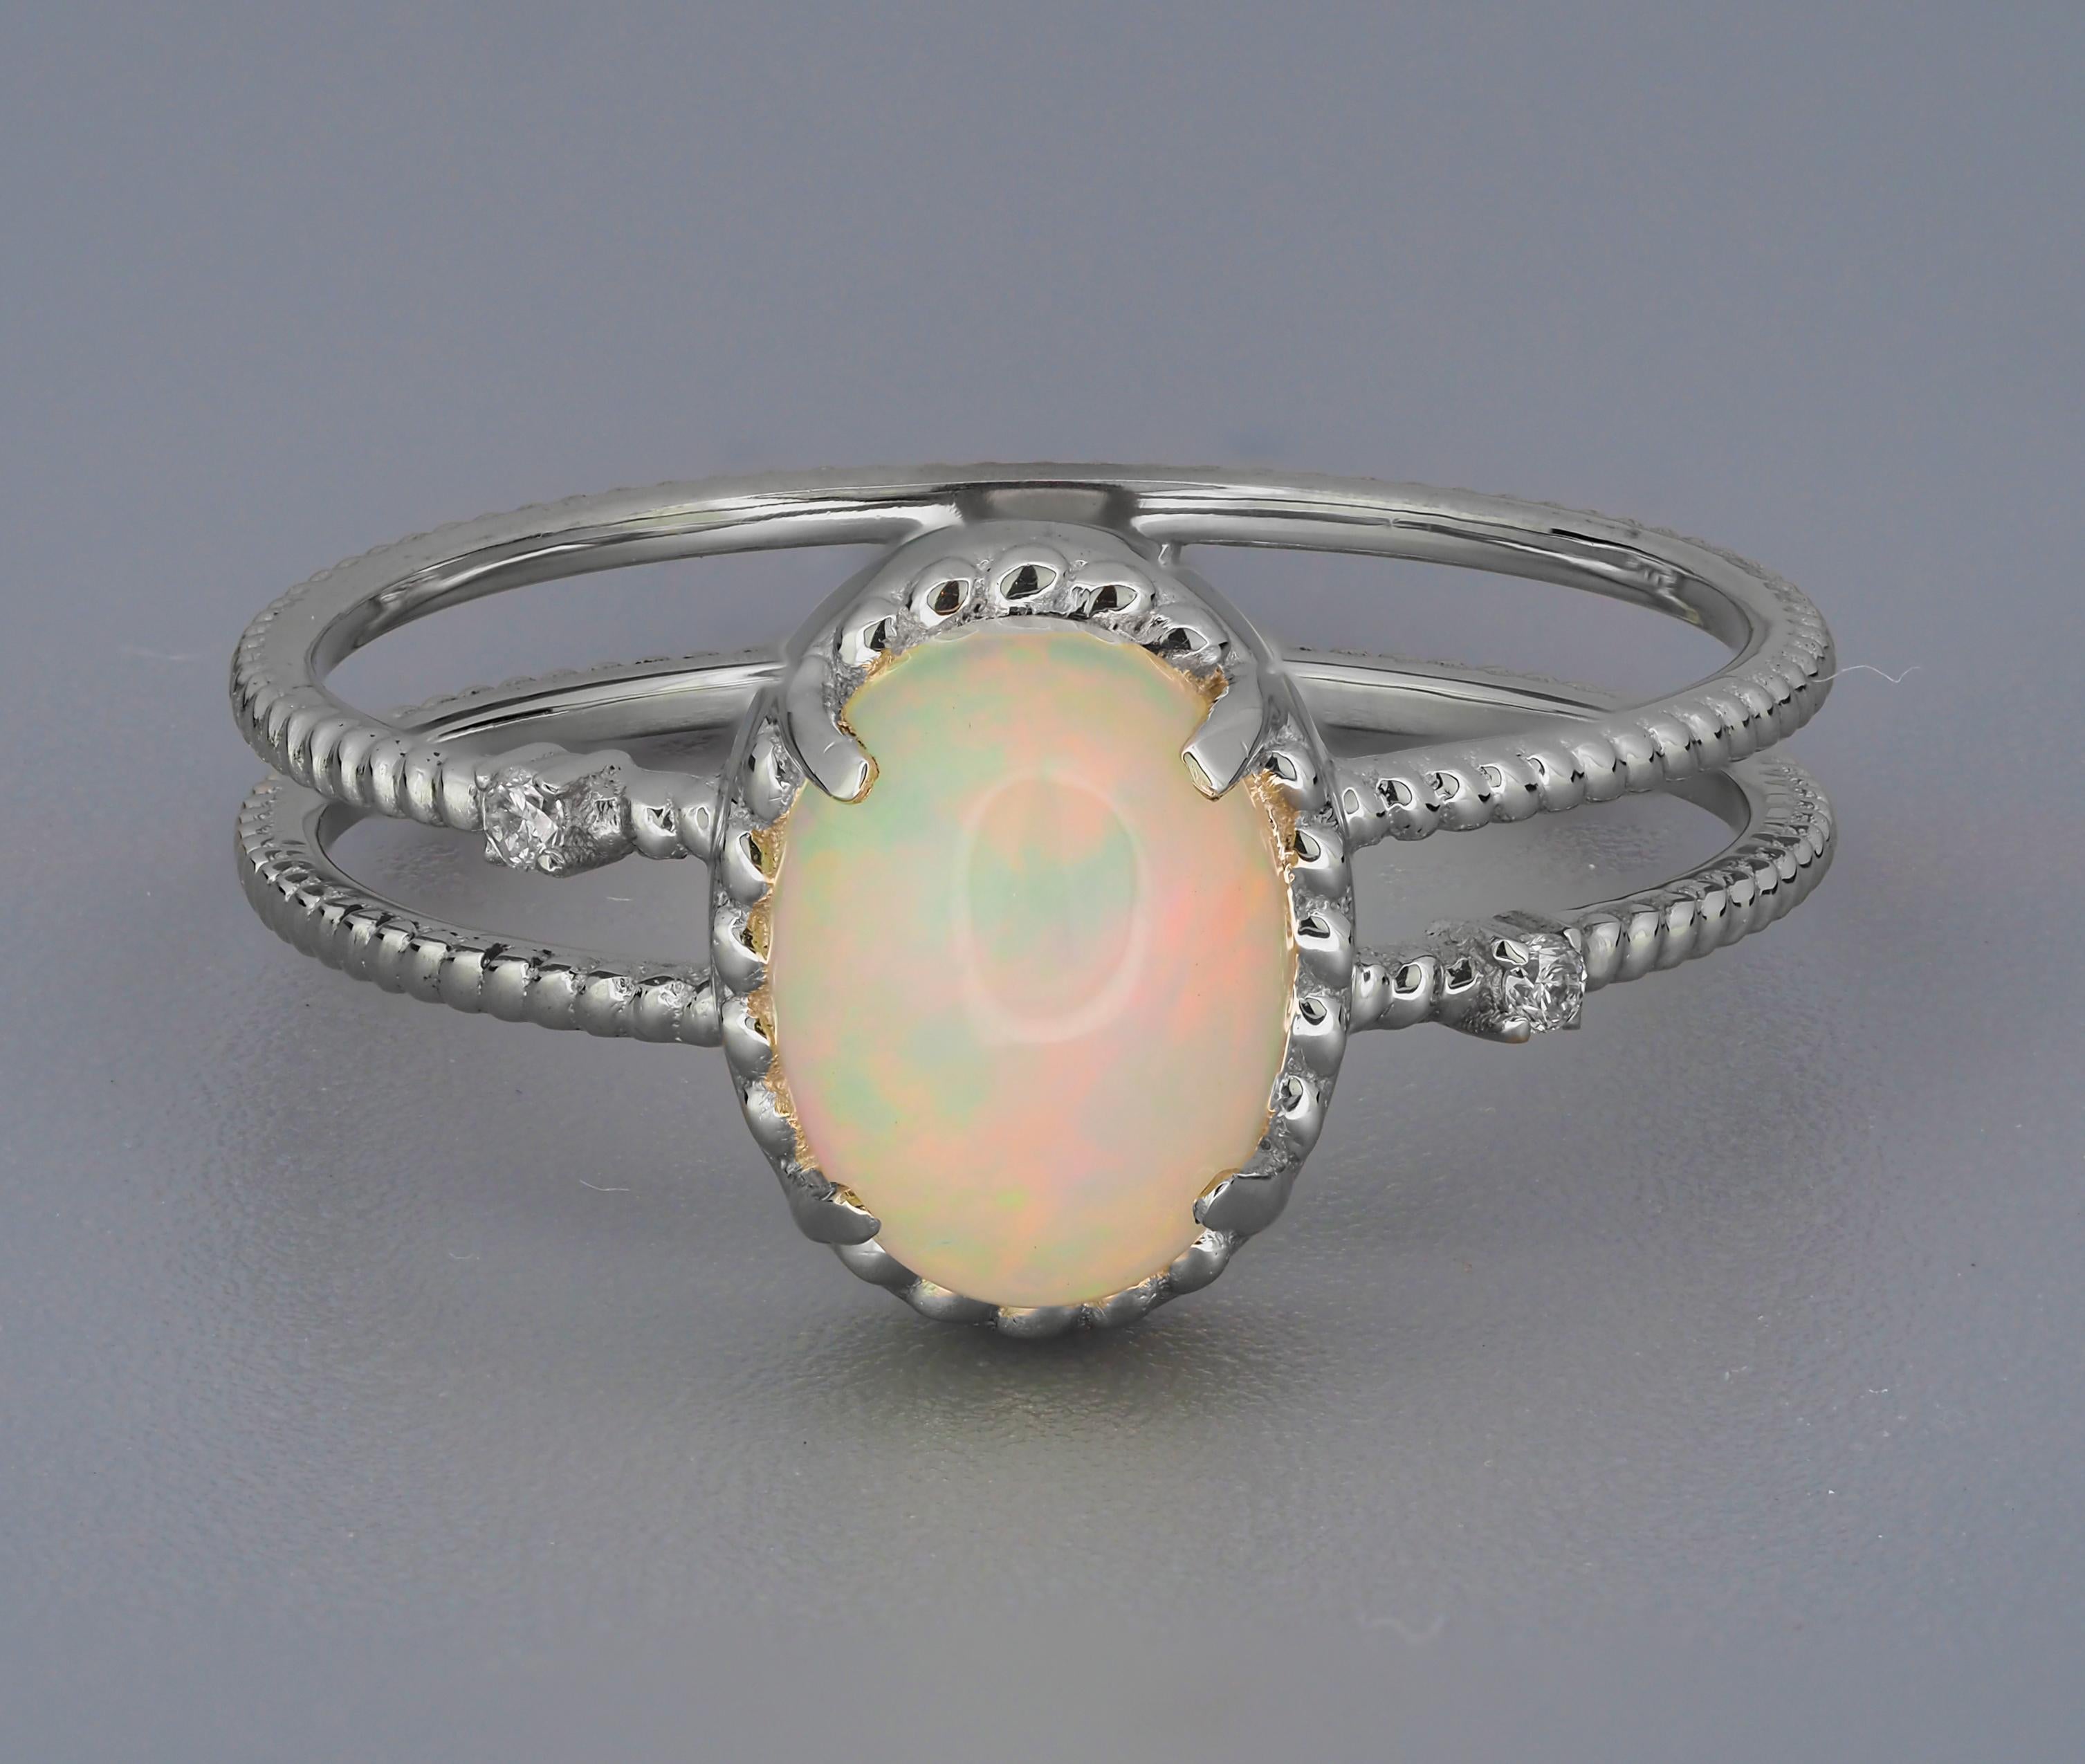 Cabochon opal 14k gold ring. 
Gold ring with Opal. Minimalist opal ring. Opal engagement ring. Opal promise ring. Opal Birthstone Ring.

etal: 14k gold
Weight: 2 g. depends from size.

Central stone: Opal
Cut: oval cabochon
Weight: aprx 1.2